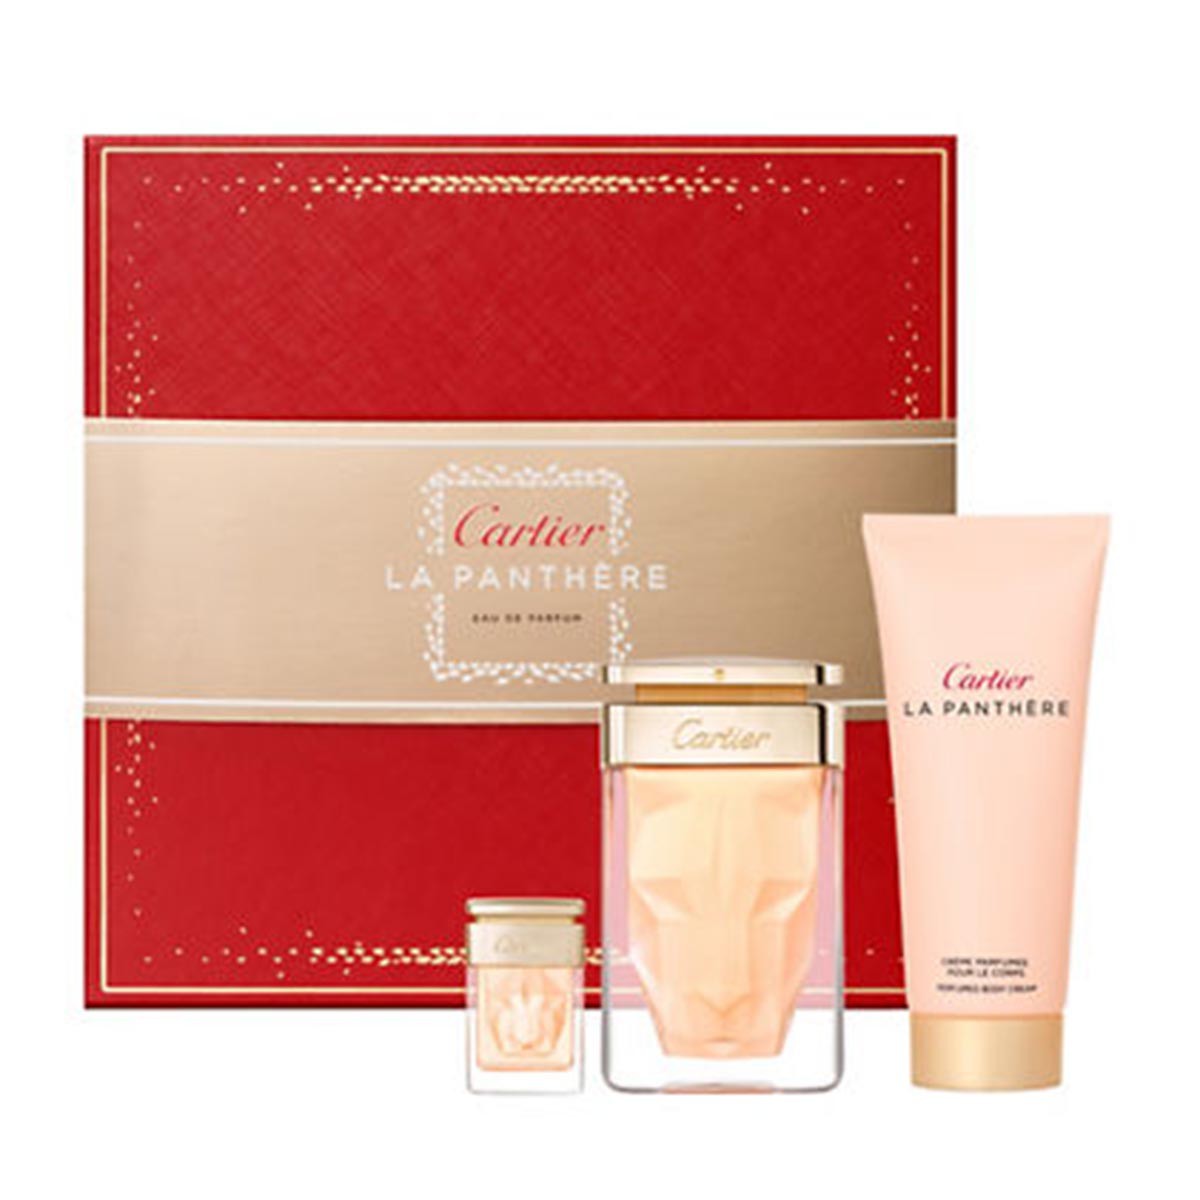 cartier panthere gift set